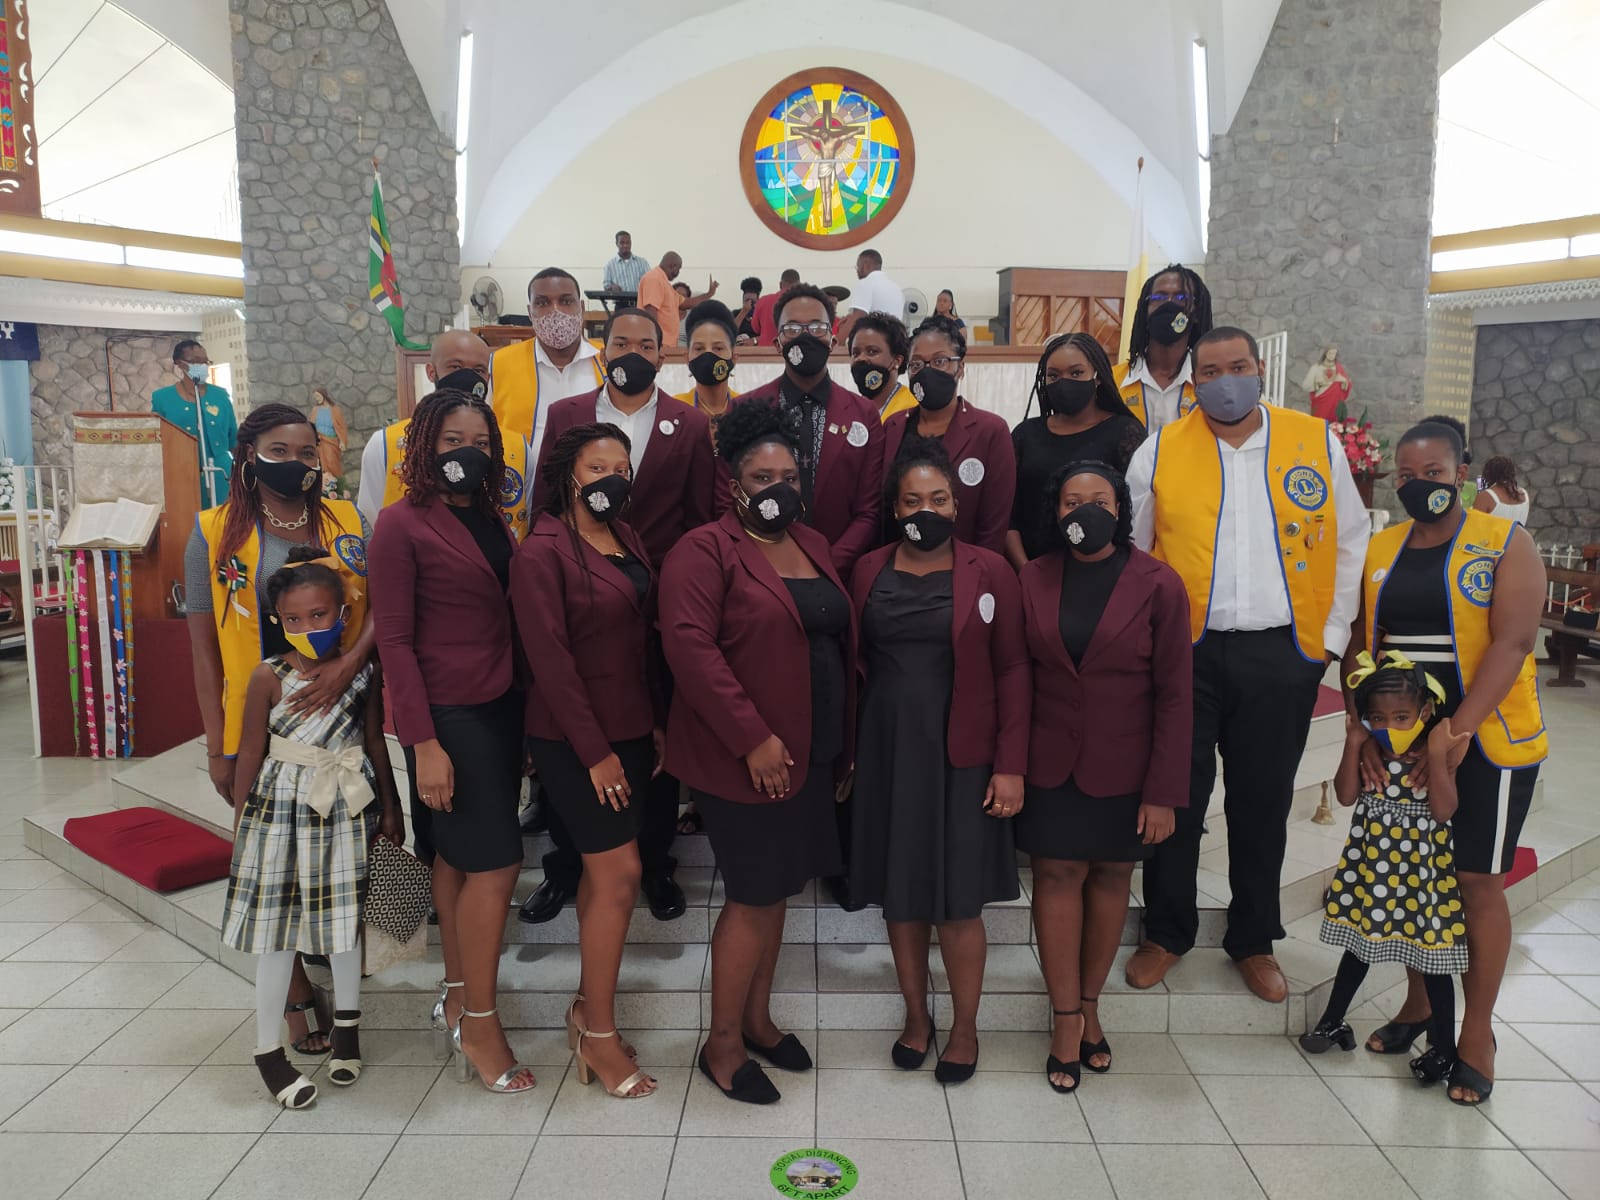 THE LEO CLUB OF DOMINICA CELEBRATES 26 YEARS OF SERVICE!